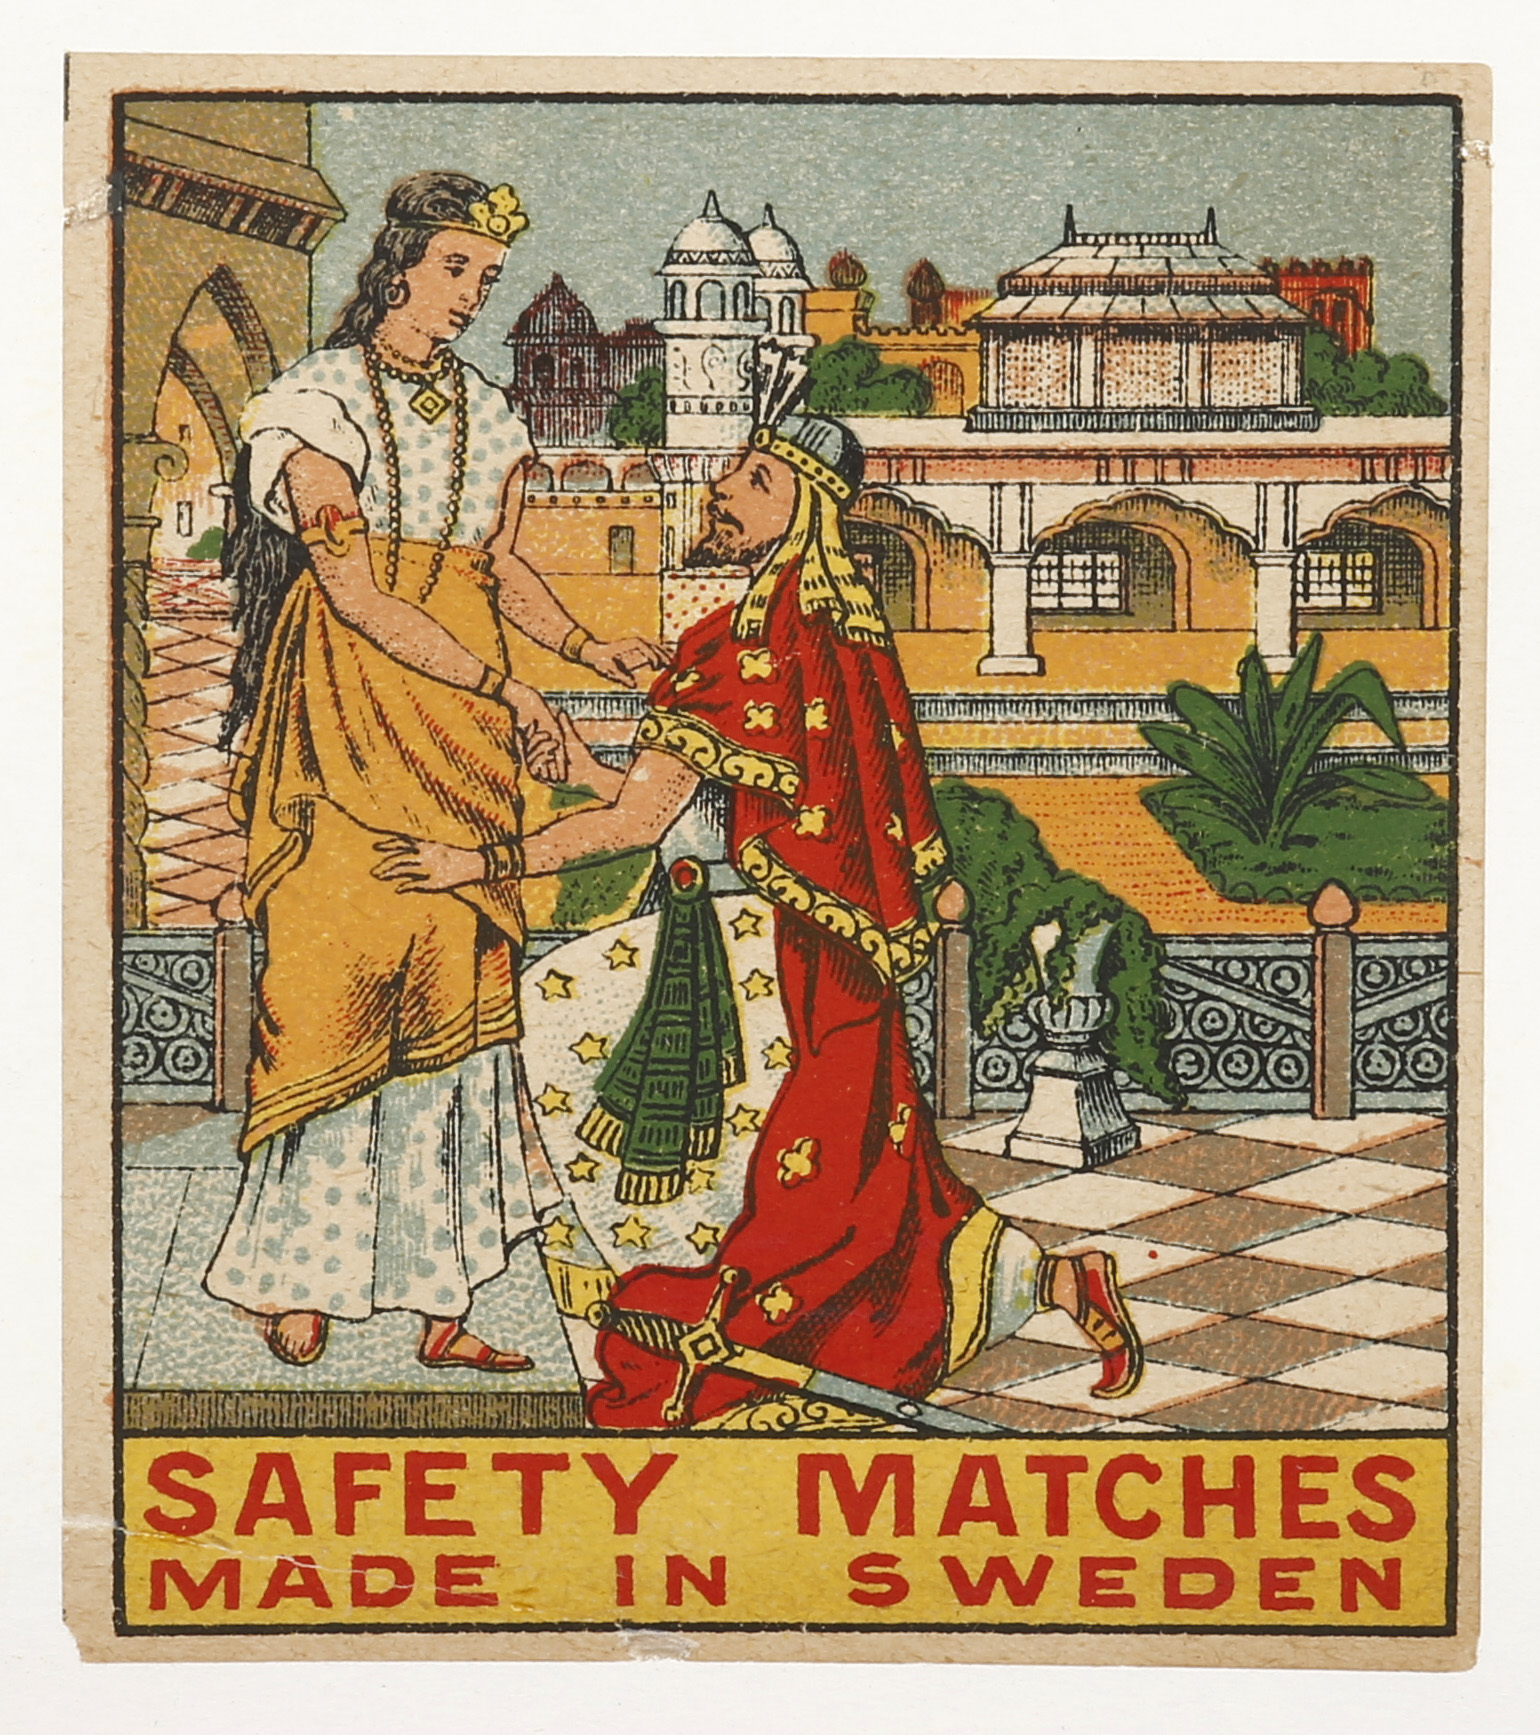 Royal Matches - Antique Print from 1920